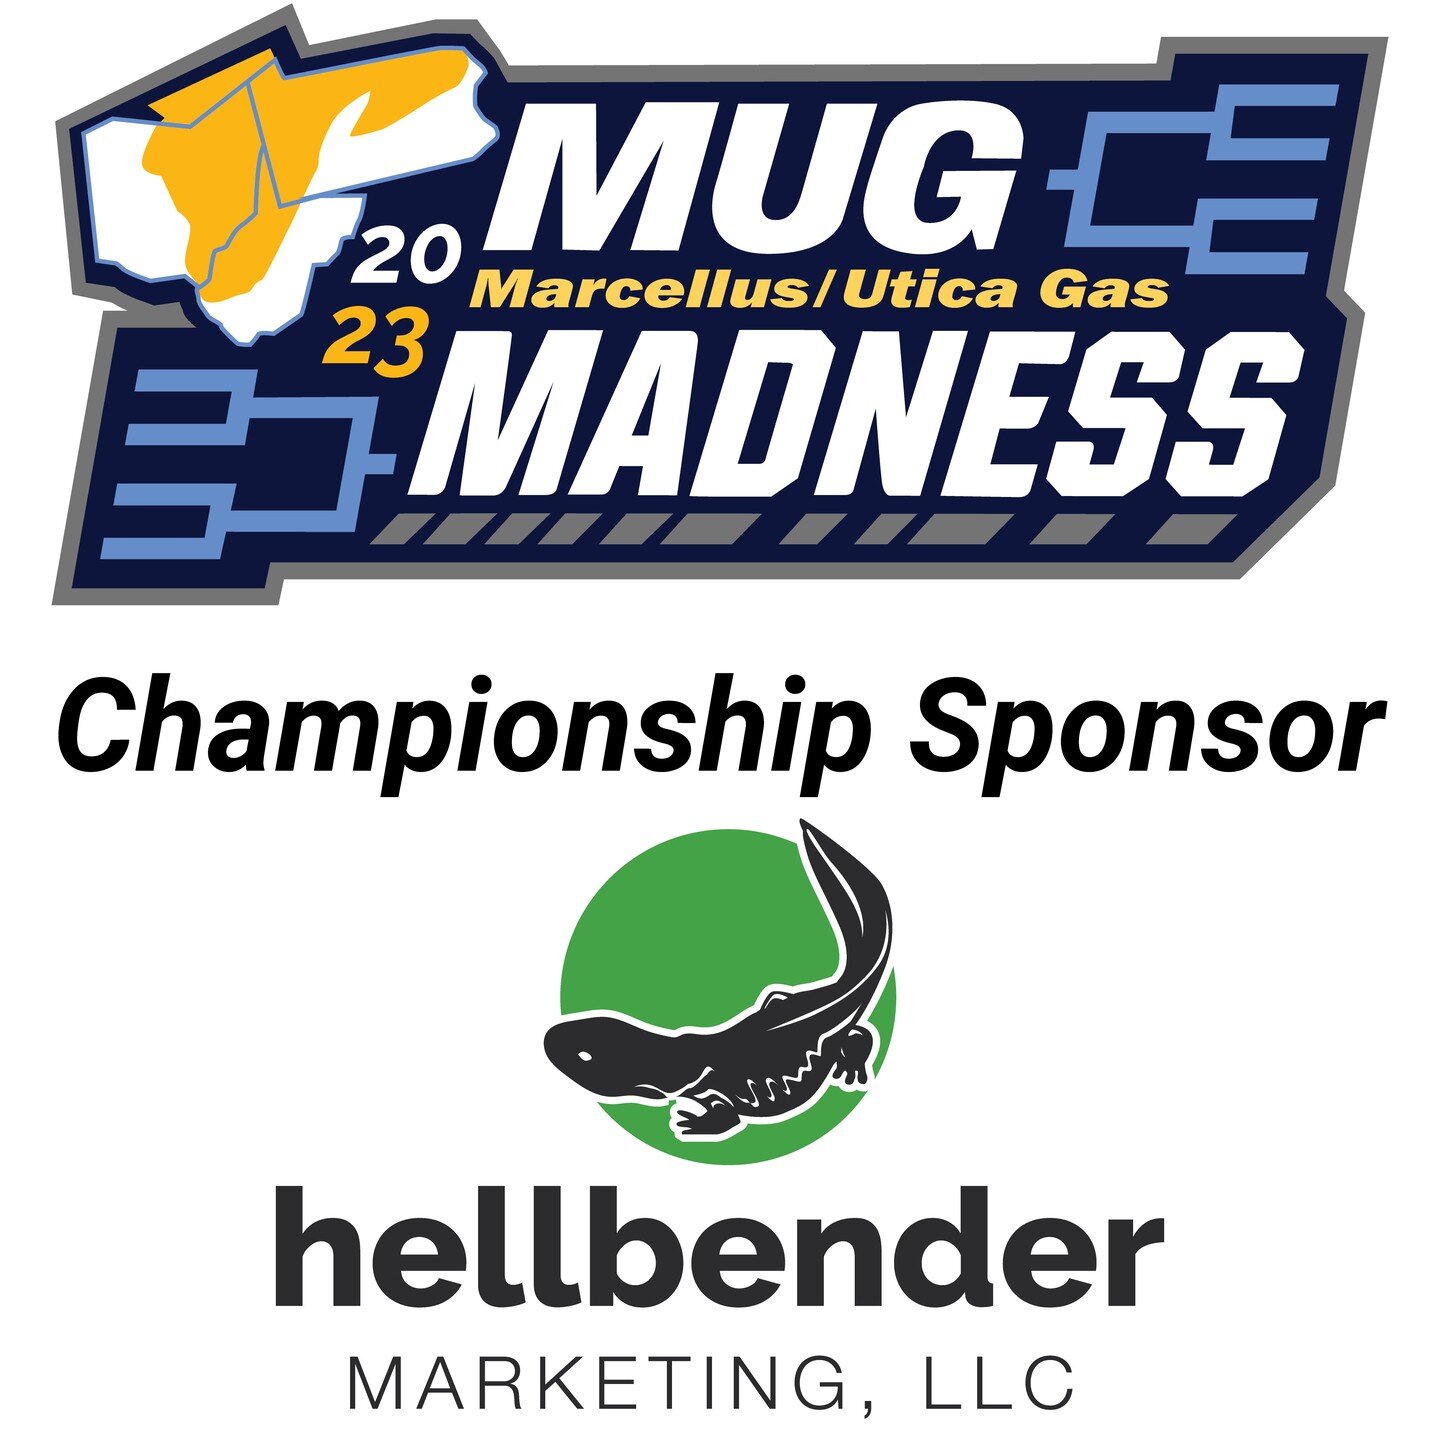 Thank you to @hellbendermarketing for being a Championship Sponsor for this year's MUG Madness Happy Hour!

#MUG #MUGMadness #OilAndGas #MarcellusShale #UticaShale #EnergyStrong